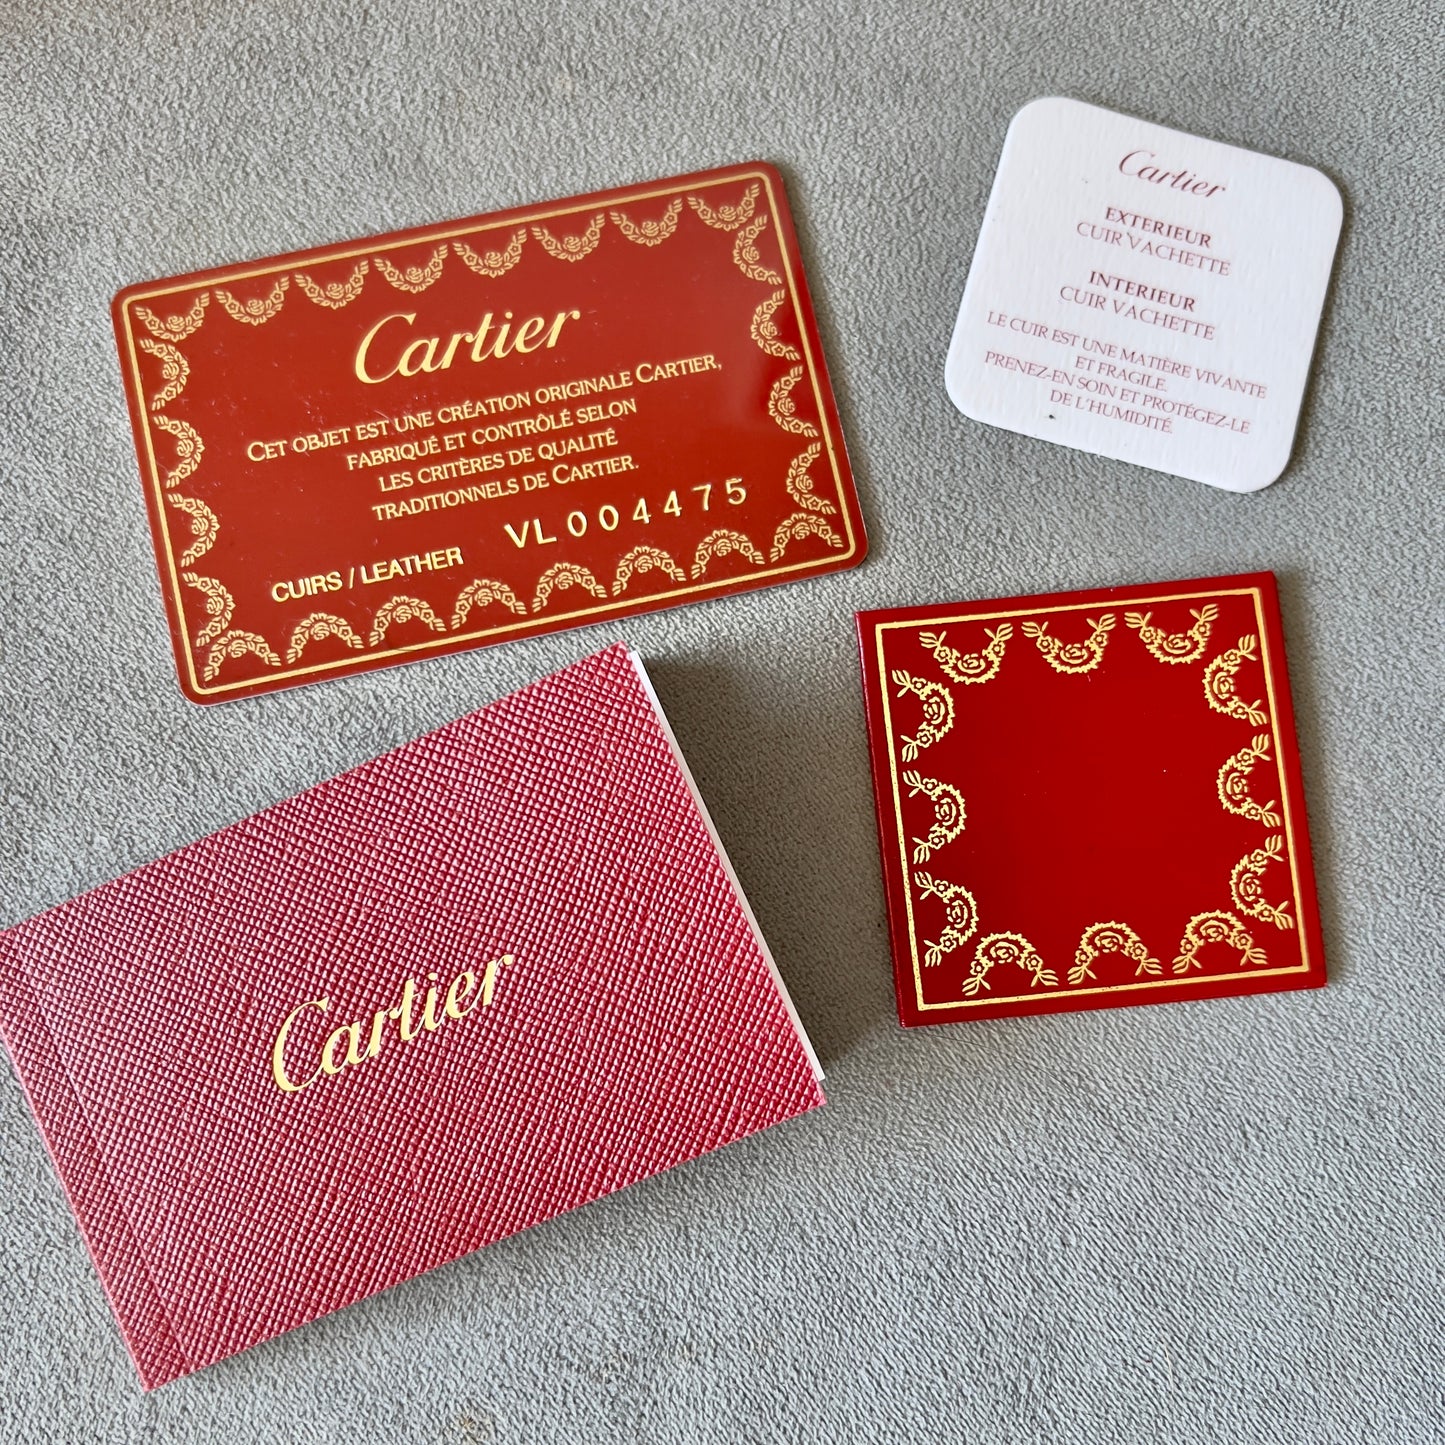 CARTIER Wallet Box 8x4.75x1.80 inches + Pouch + Booklets + Certificate + Ribbon